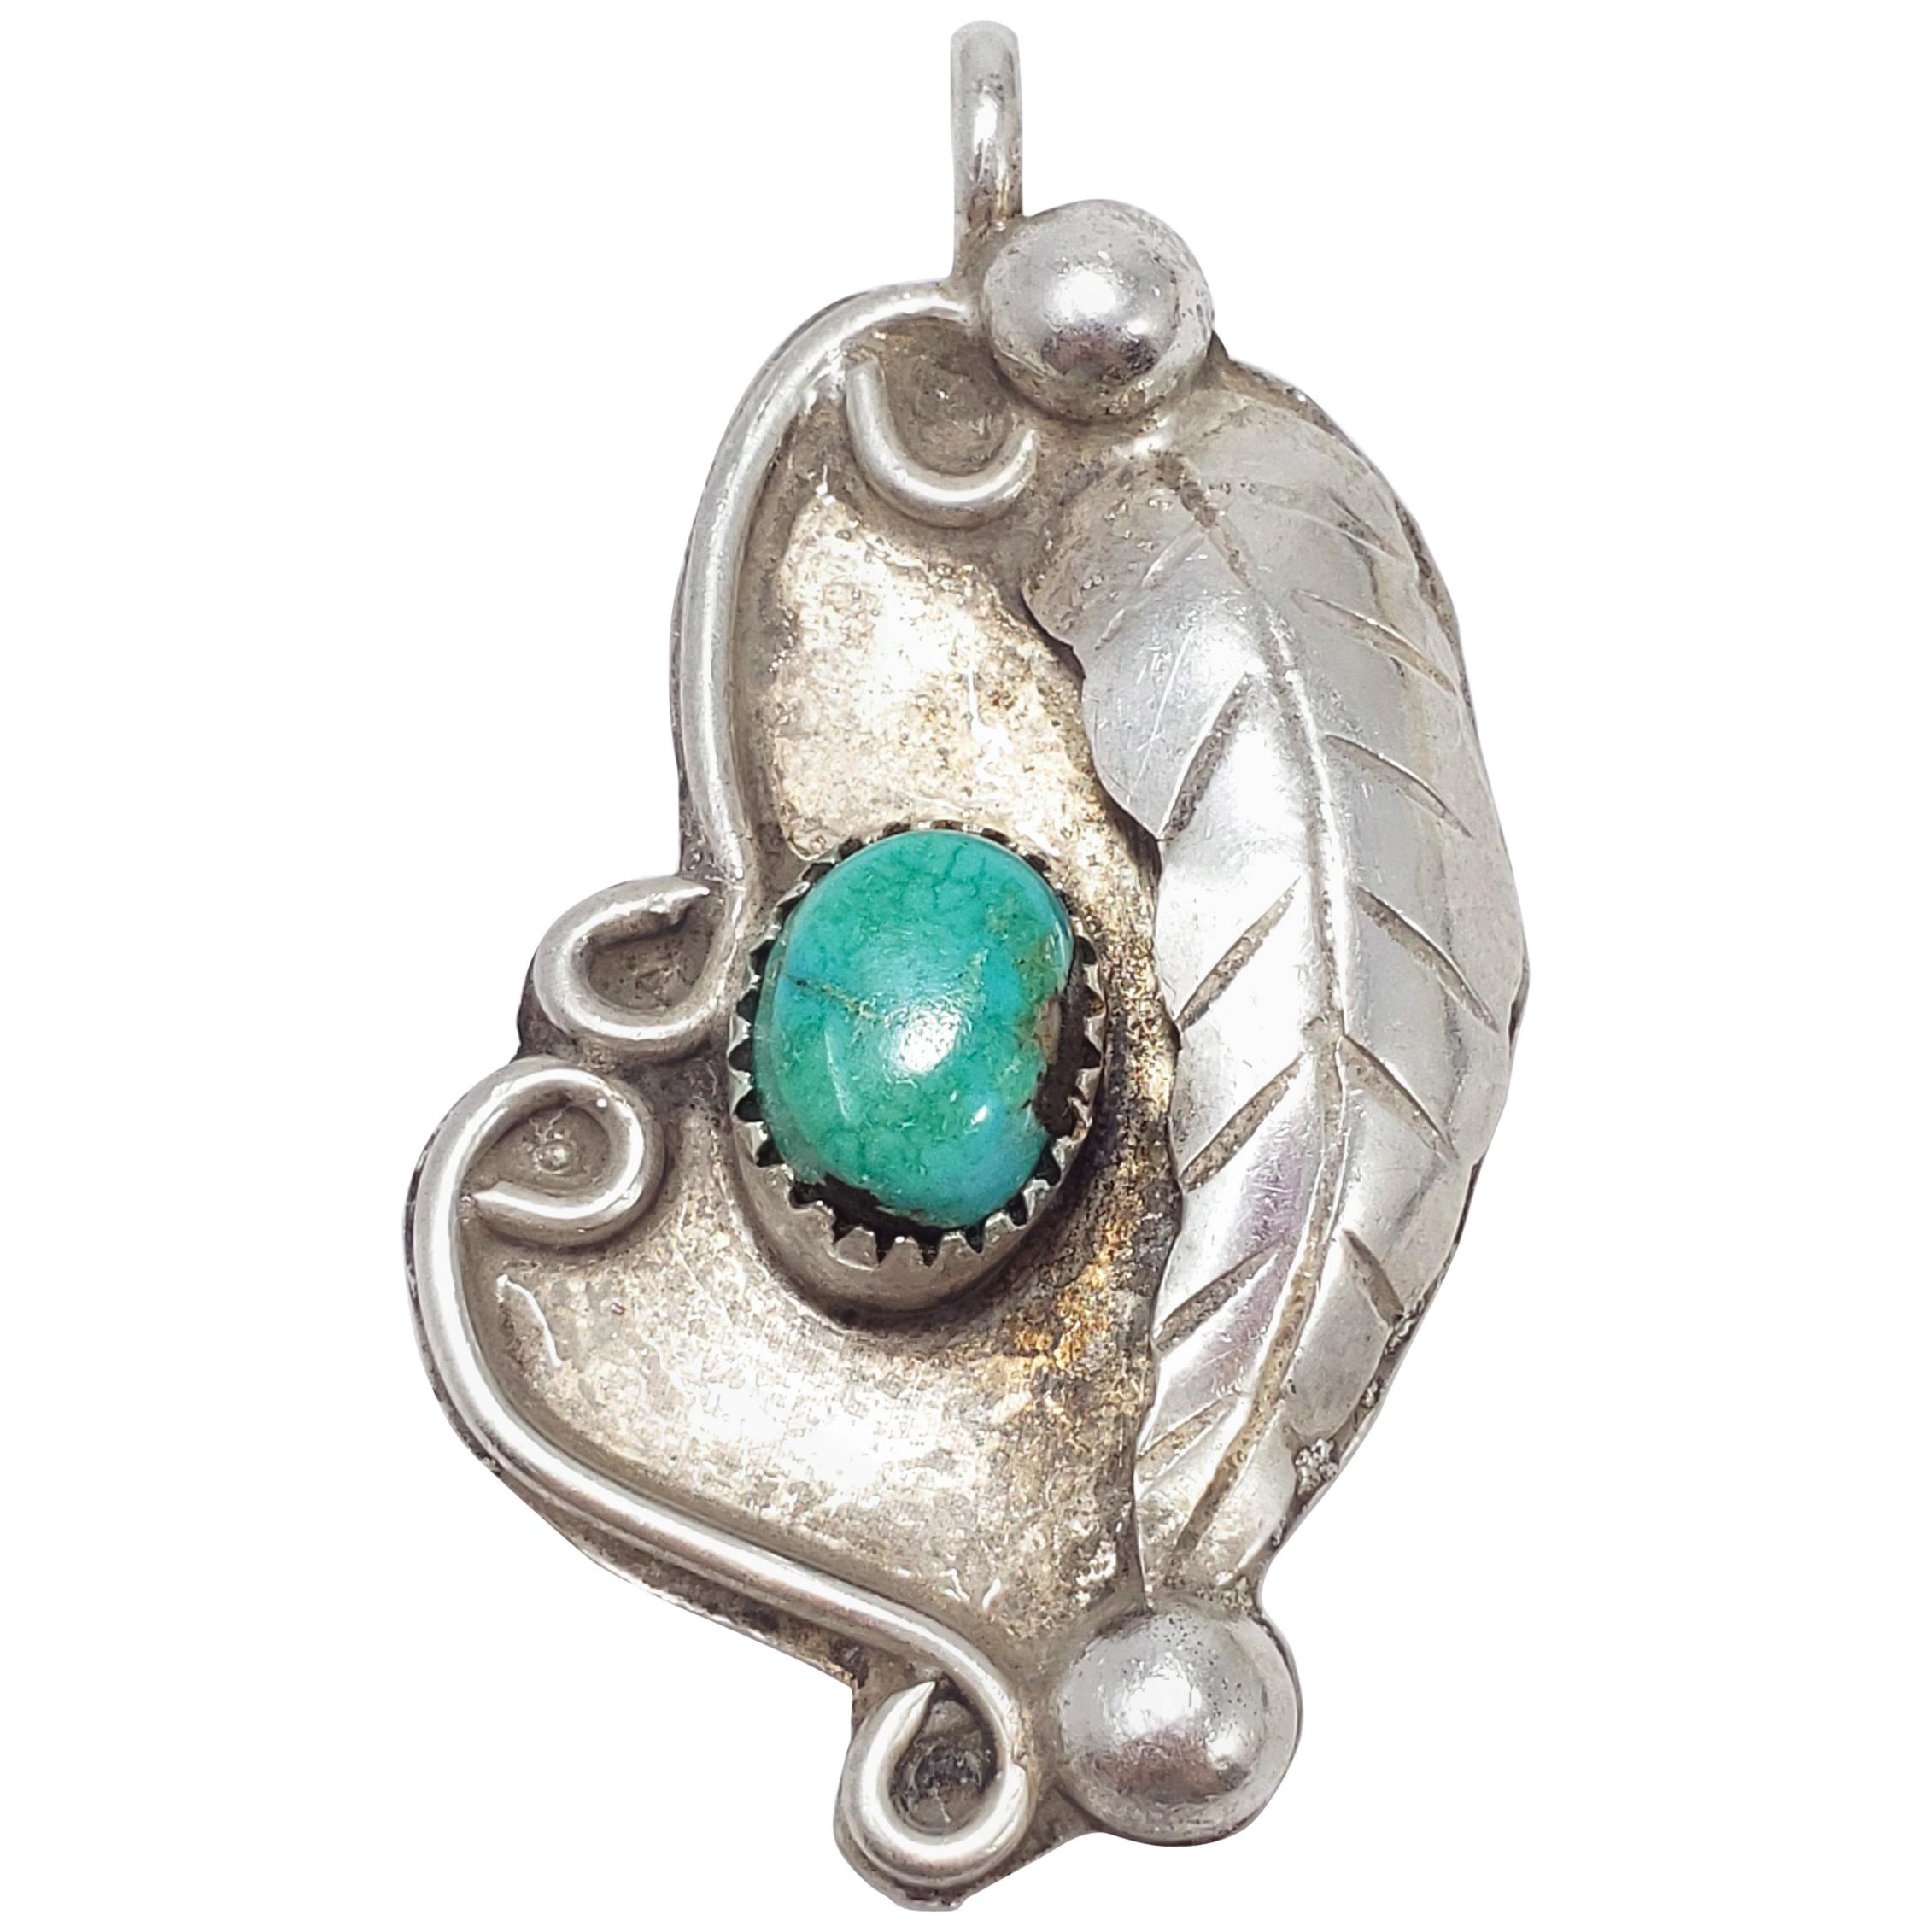 Native American Navajo Leaf Motif Turquoise Pendant in Sterling Silver